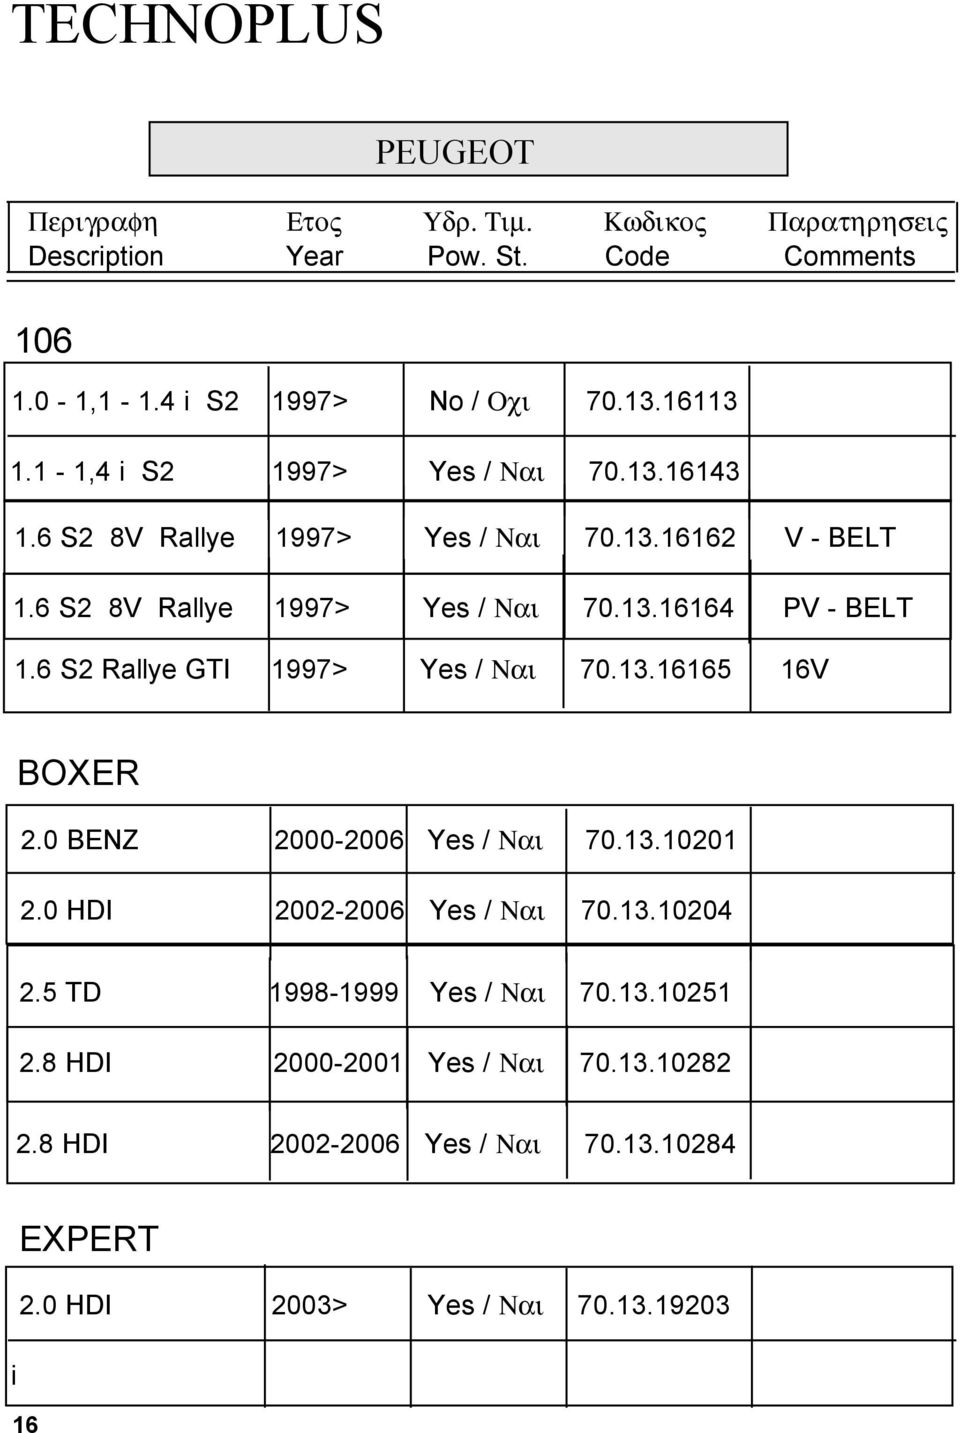 6 S2 Rallye GTI 1997> Yes / Ναι 70.13.16165 16V BOXER 2.0 BENZ 2000-2006 Yes / Ναι 70.13.10201 2.0 HDI 2002-2006 Yes / Ναι 70.